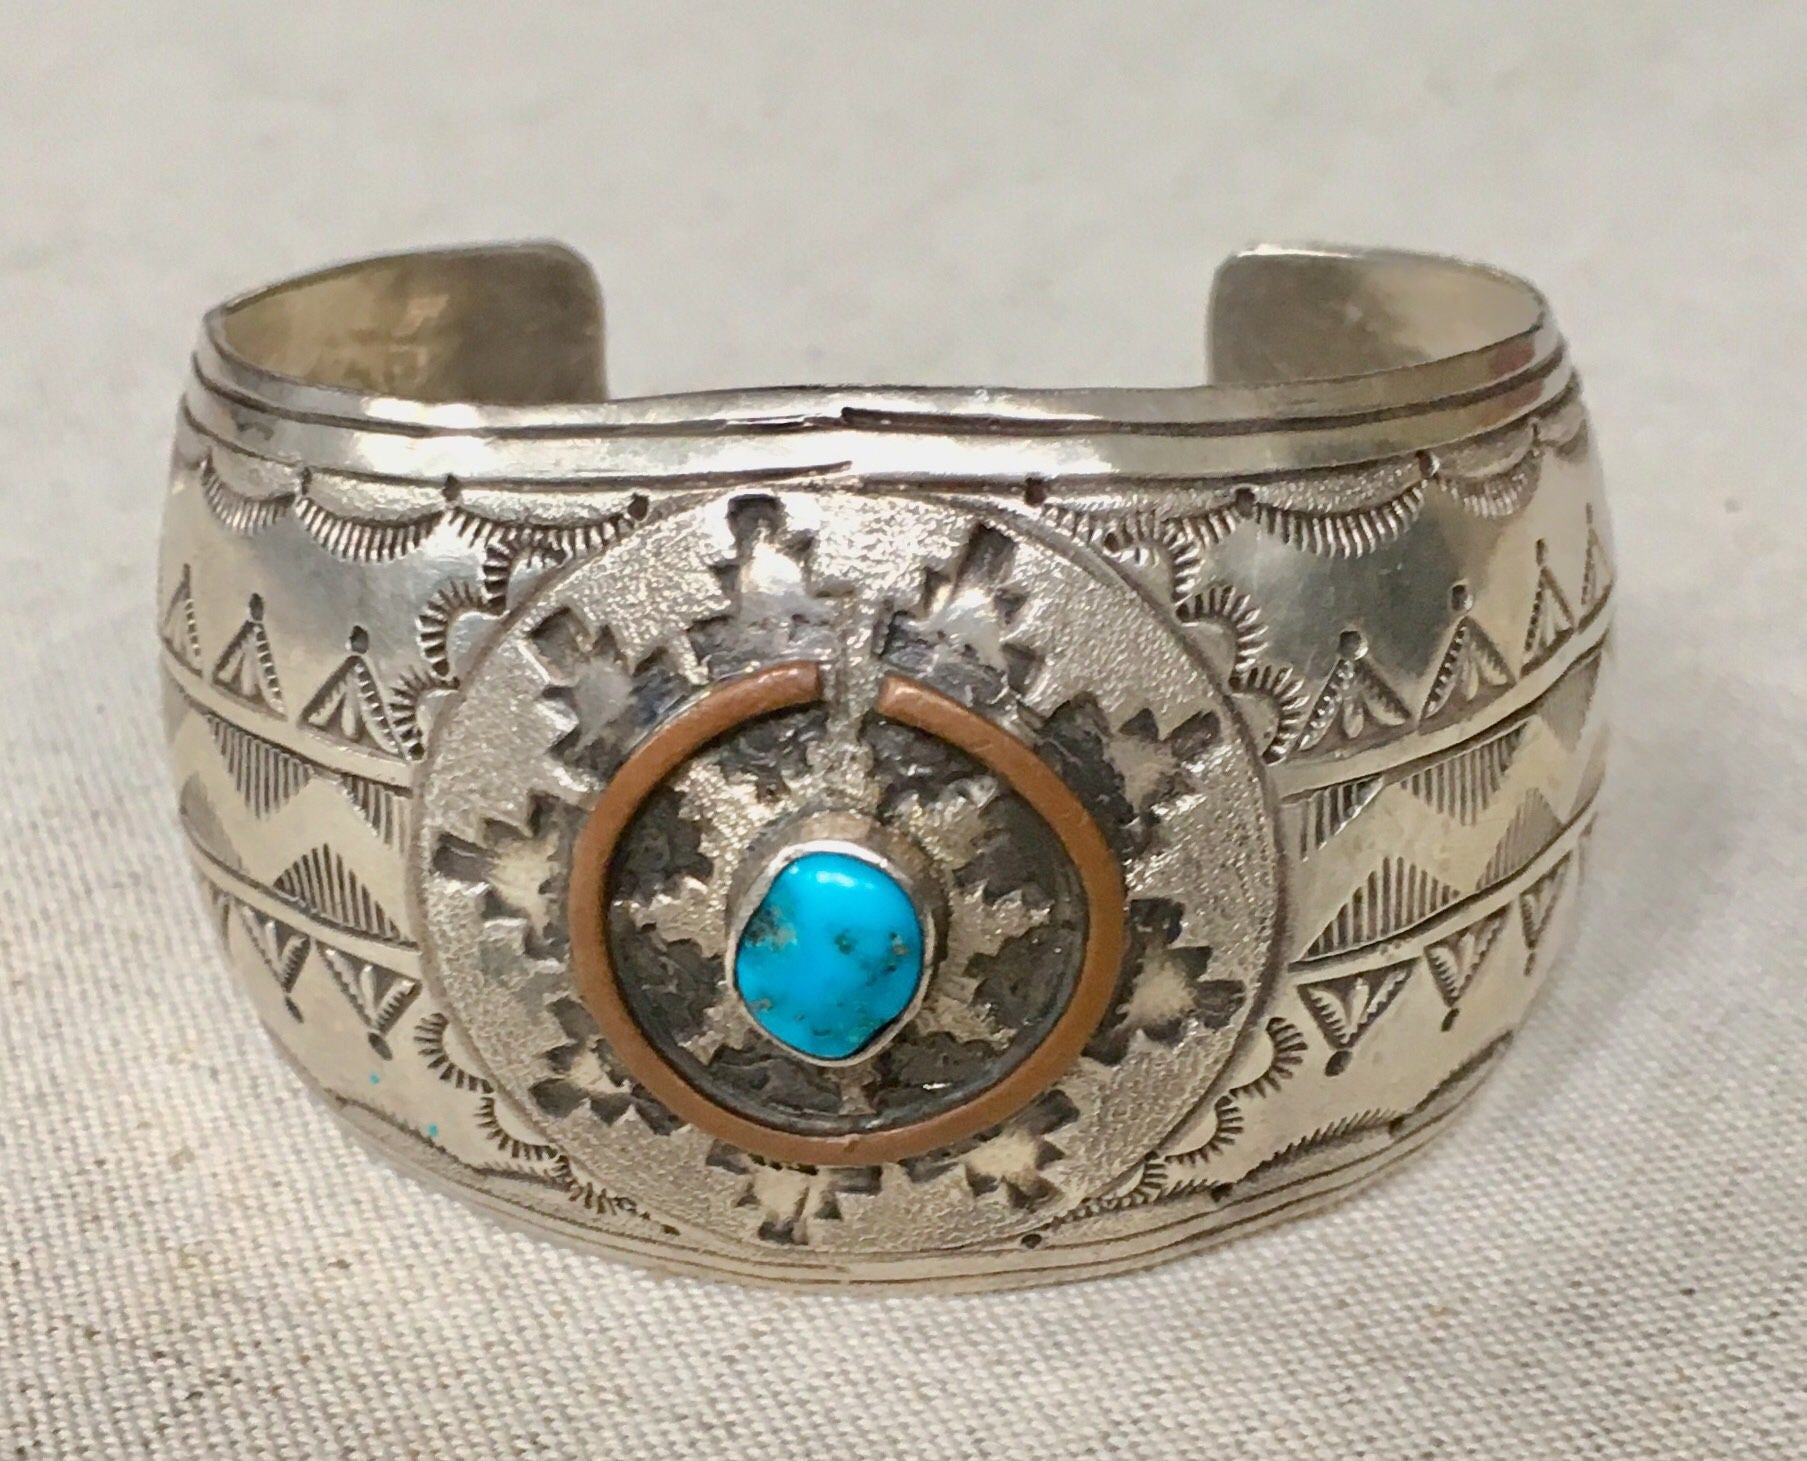 Vintage Navajo Turquoise Bracelet Cuff Sterling Silver Thick Wide ...